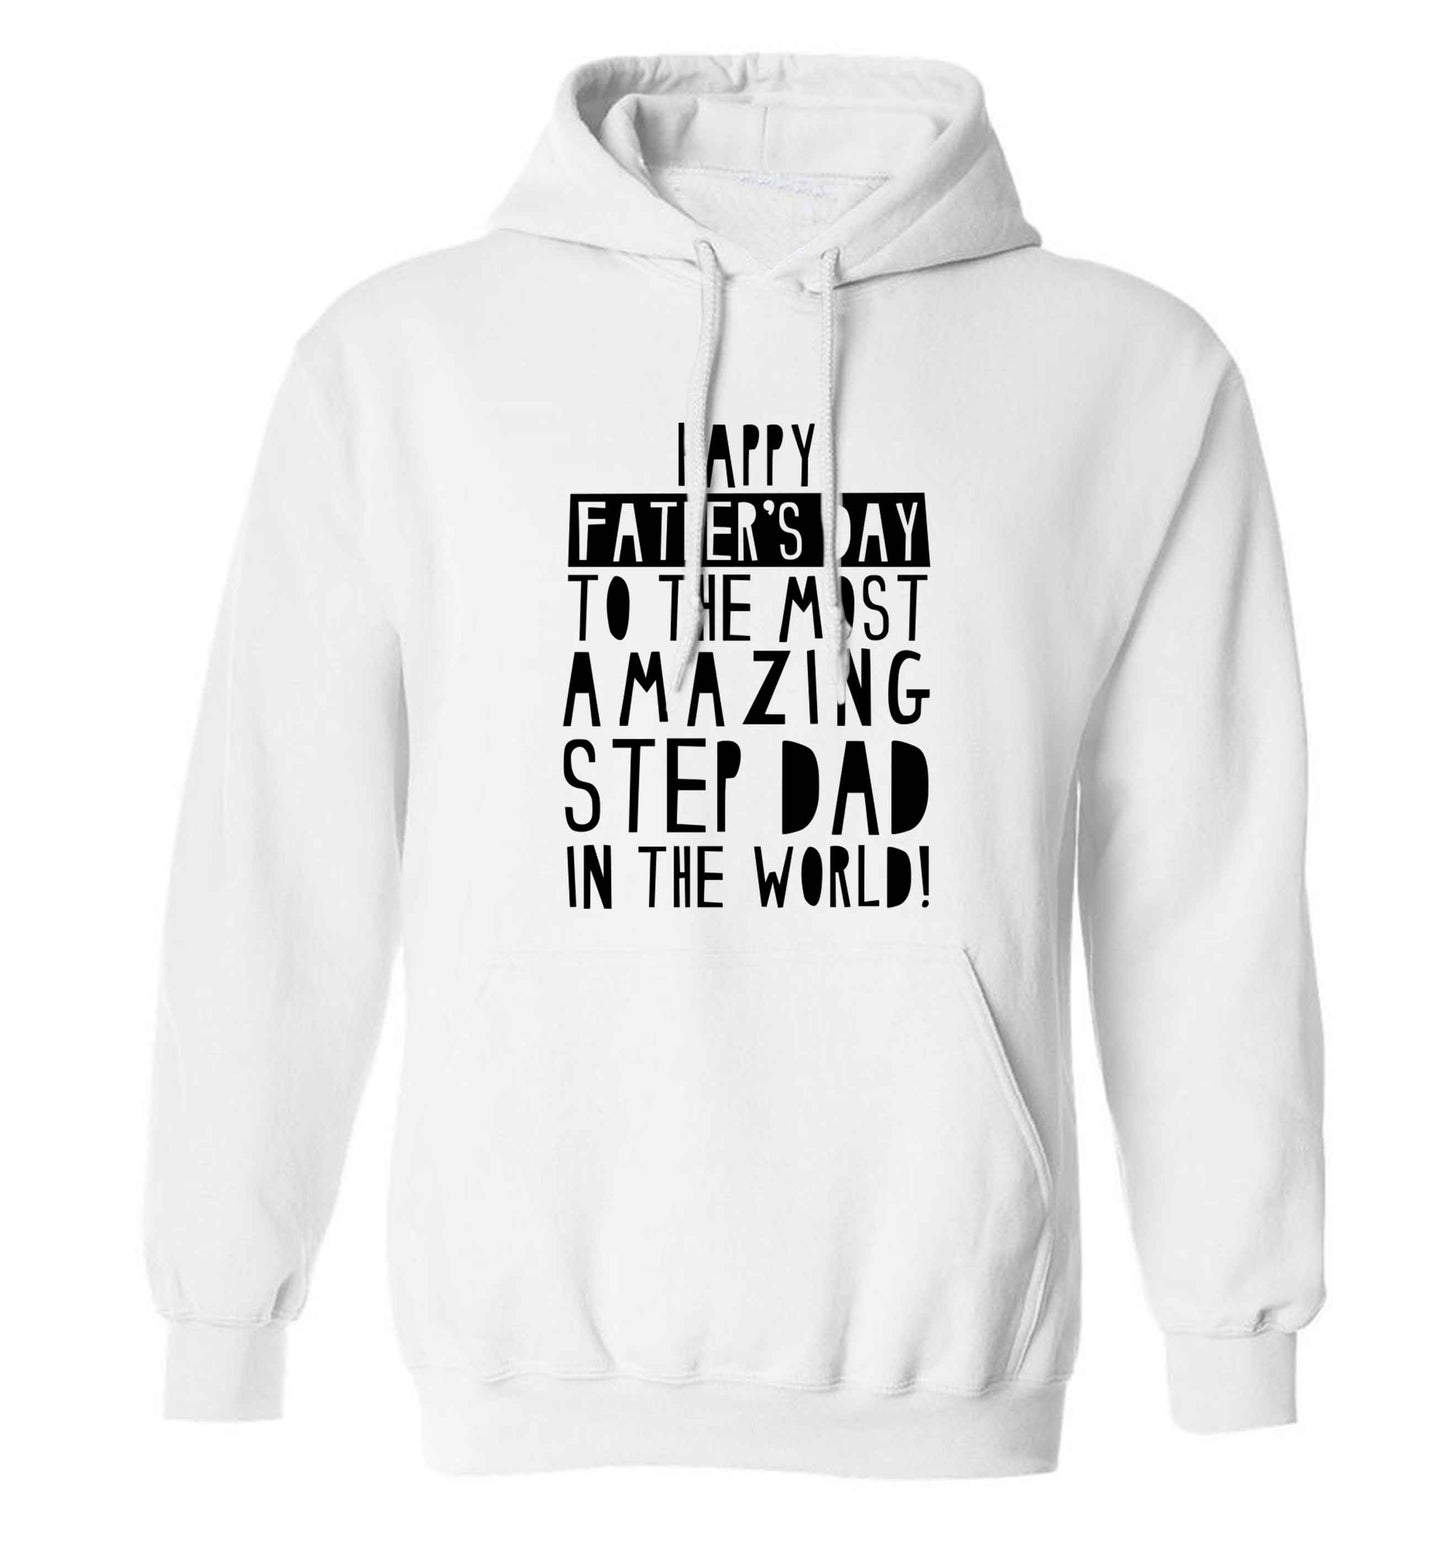 Happy Father's day to the best step dad in the world adults unisex white hoodie 2XL